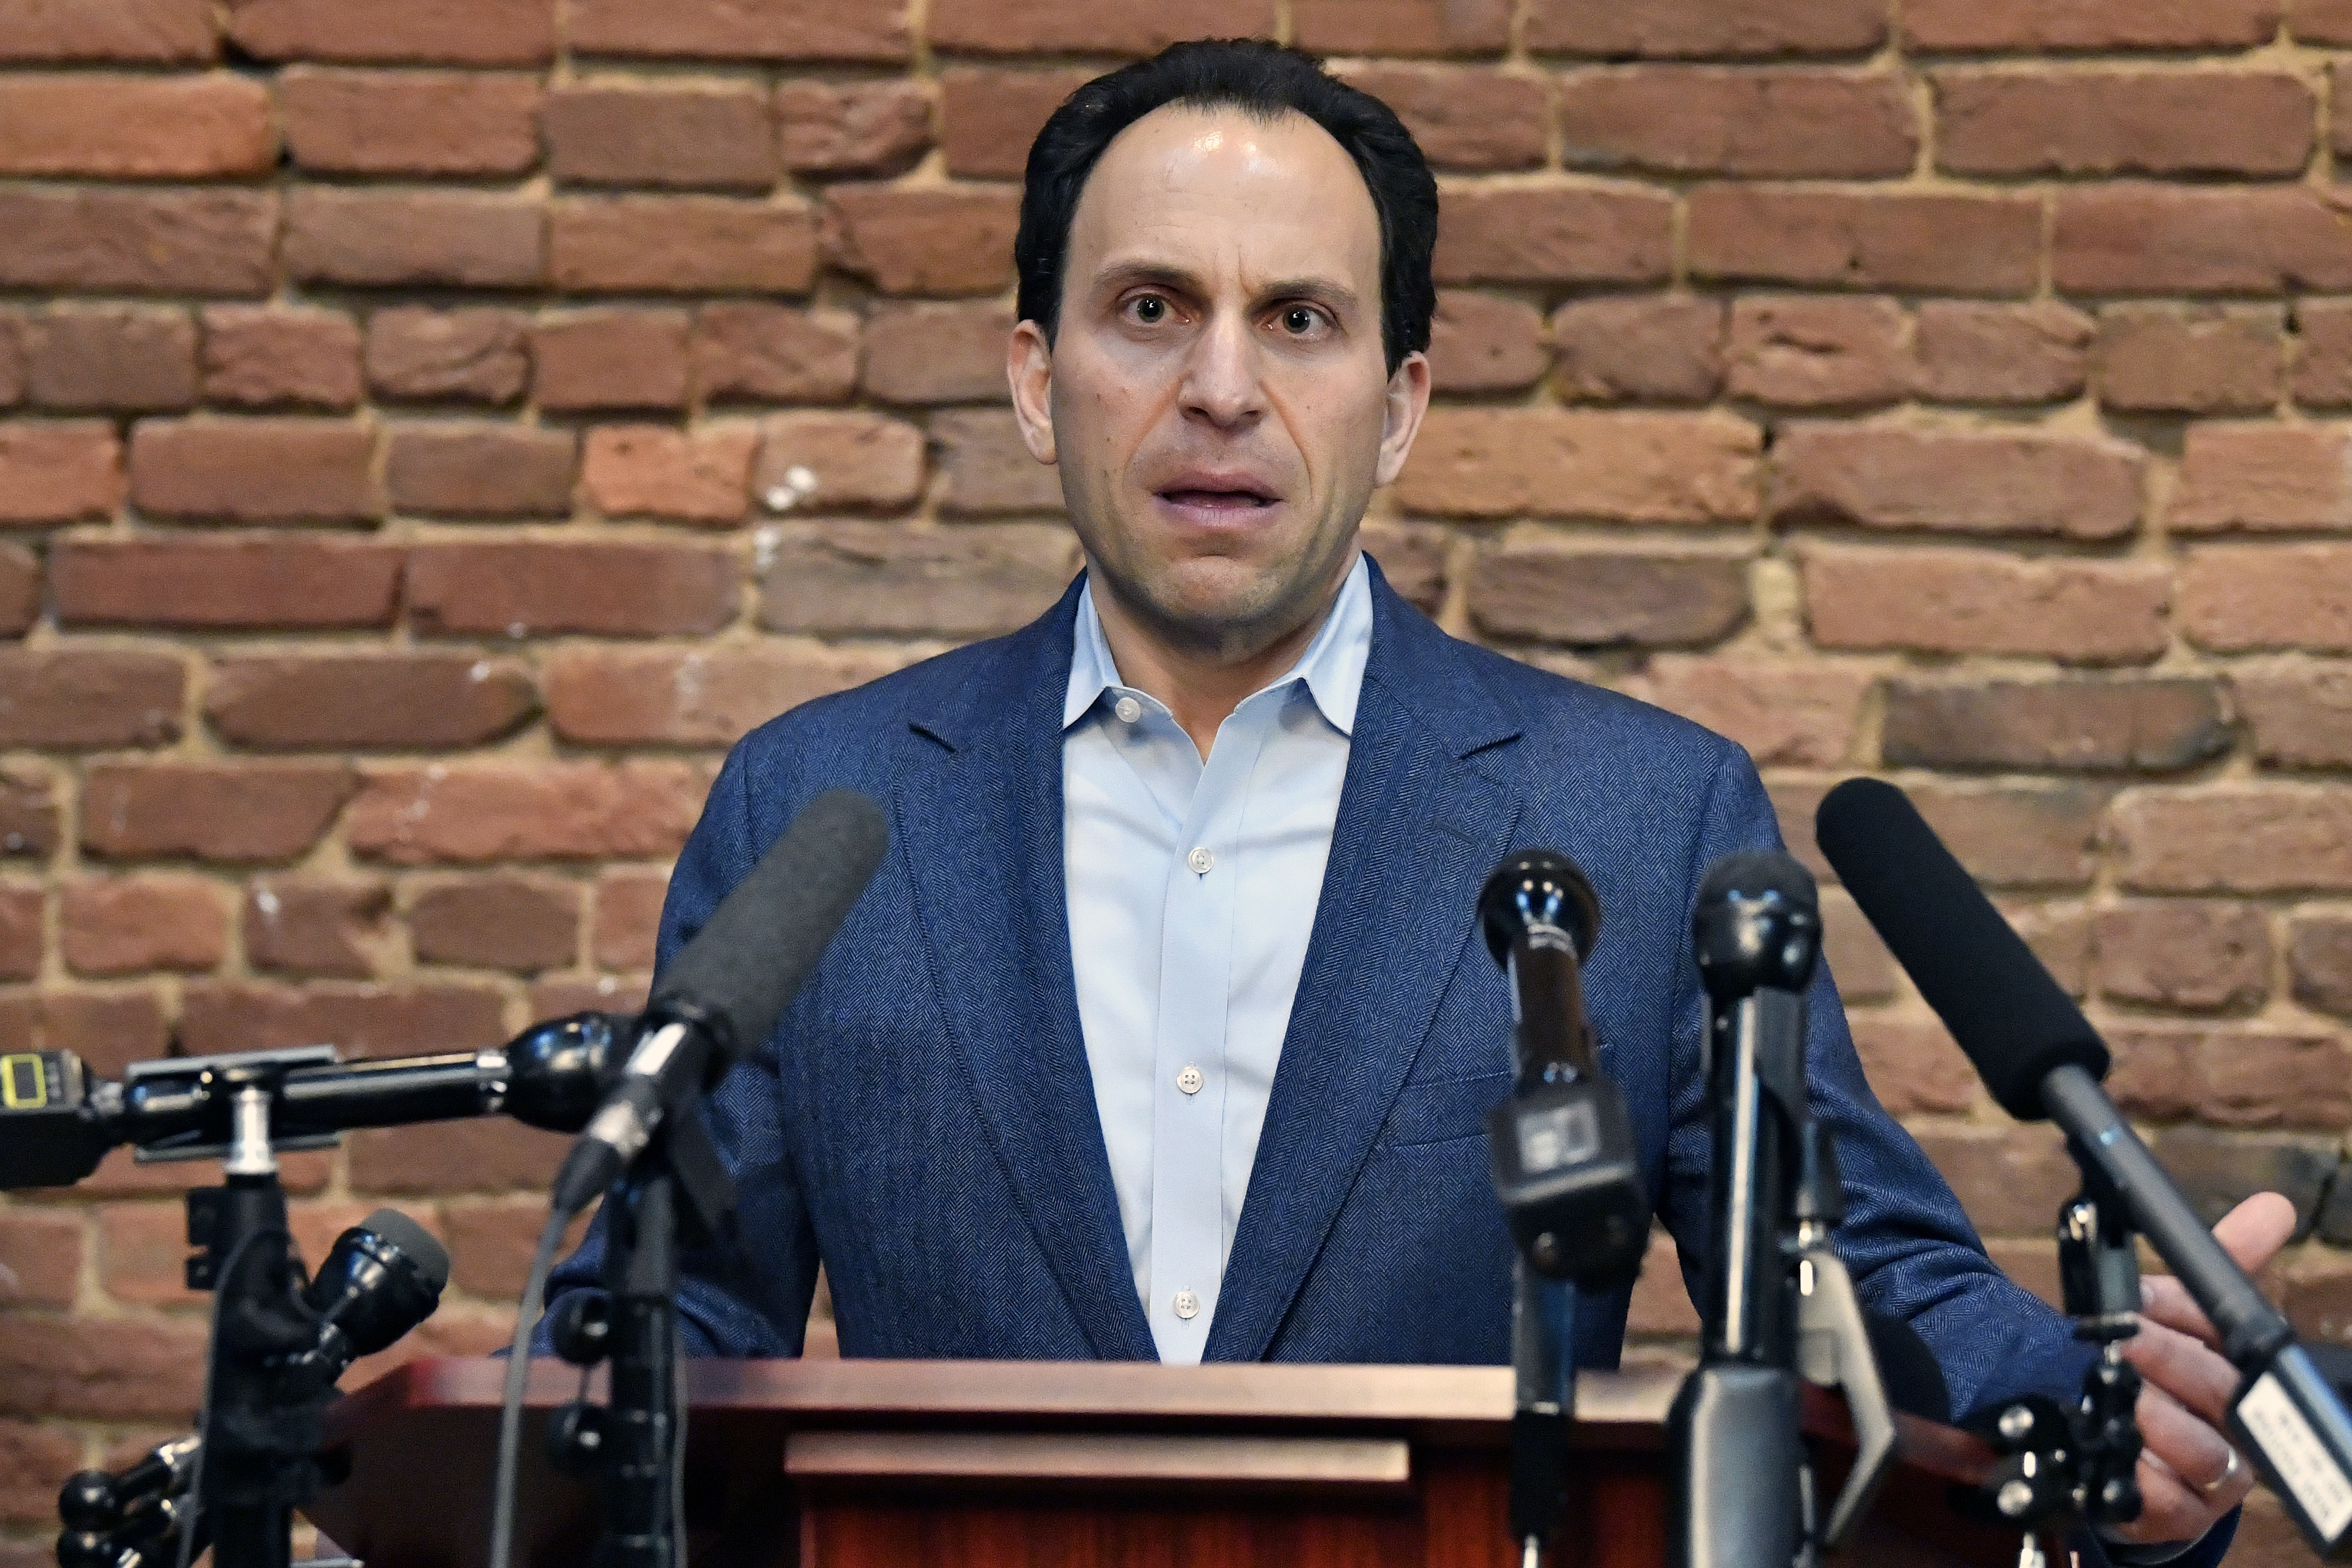 Louisville Democratic mayoral candidate Craig Greenberg speaks during a news conference in Louisville, on Feb. 14. 